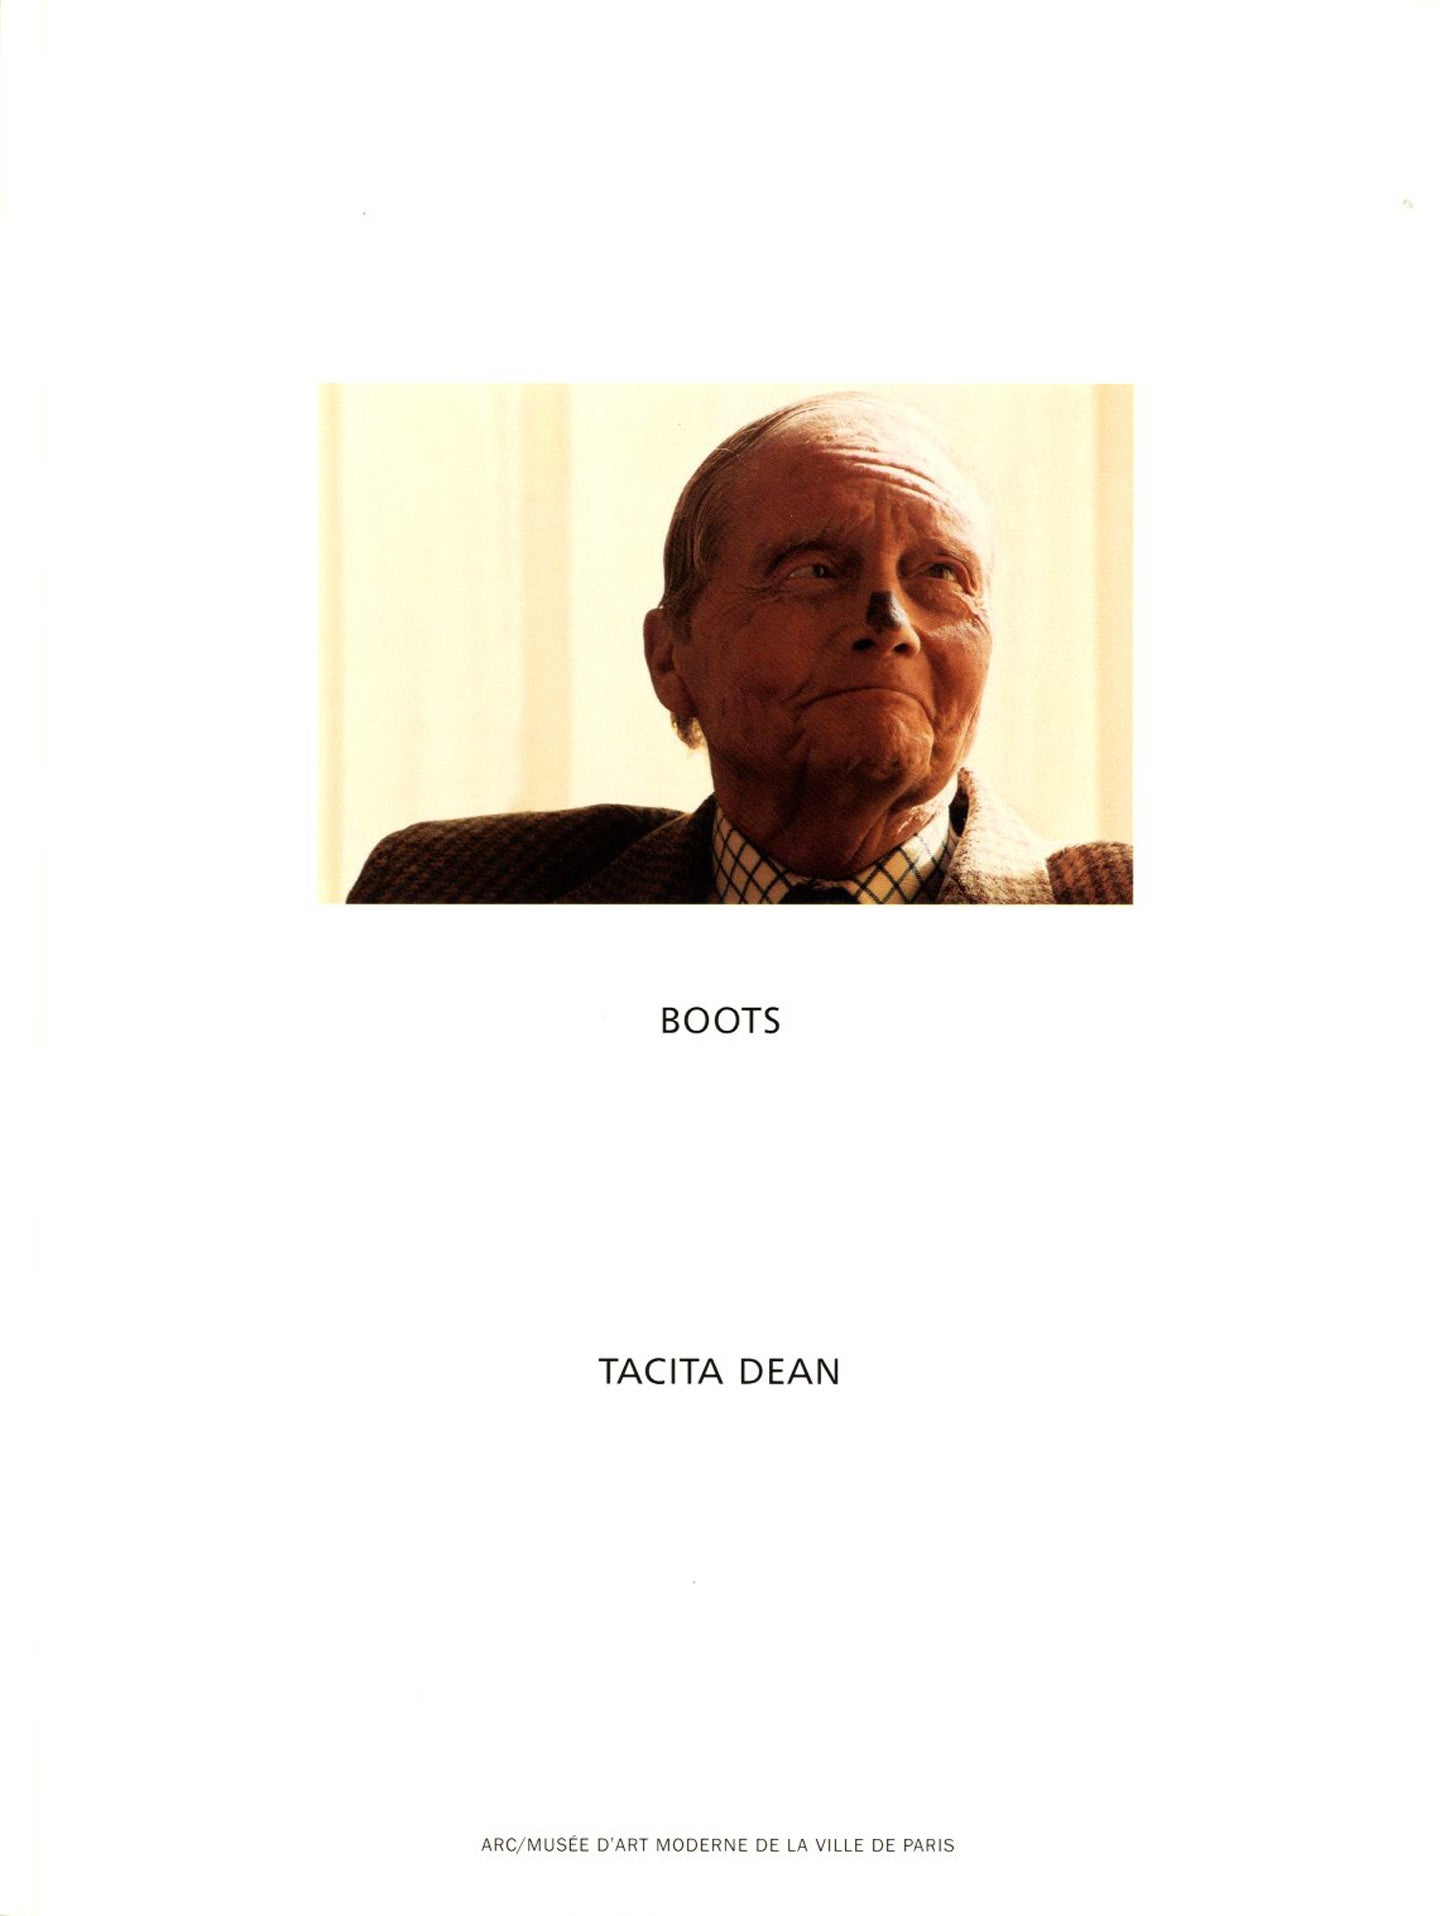 Tacita Dean: Seven Books Selected Writings, 12.10.02 - 21.12.02, W.G.  Sebald, The Russian Ending, Boots, Complete Works and Filmography  1991-2003, and